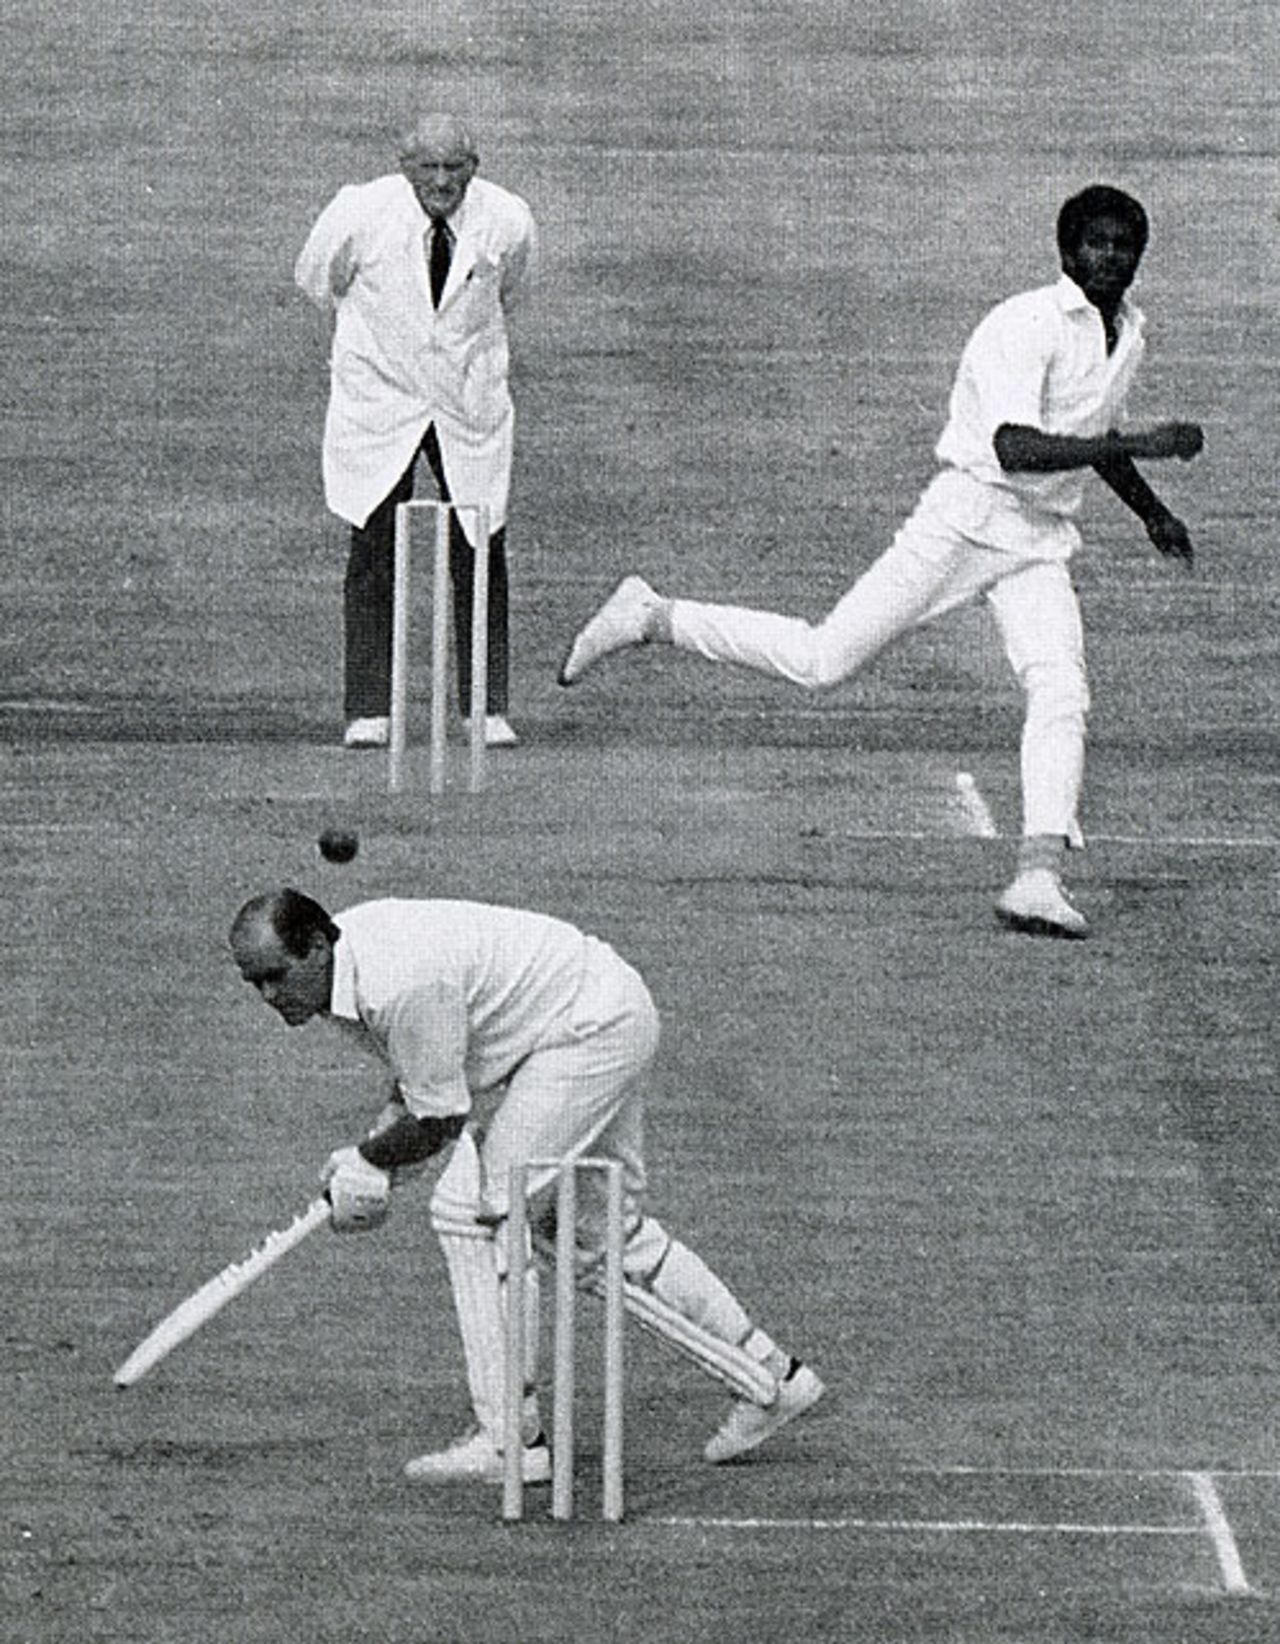 Brian Close sways out of the way of a Michael Holding bouncer, England v West Indies, Old Trafford, July 10, 1976